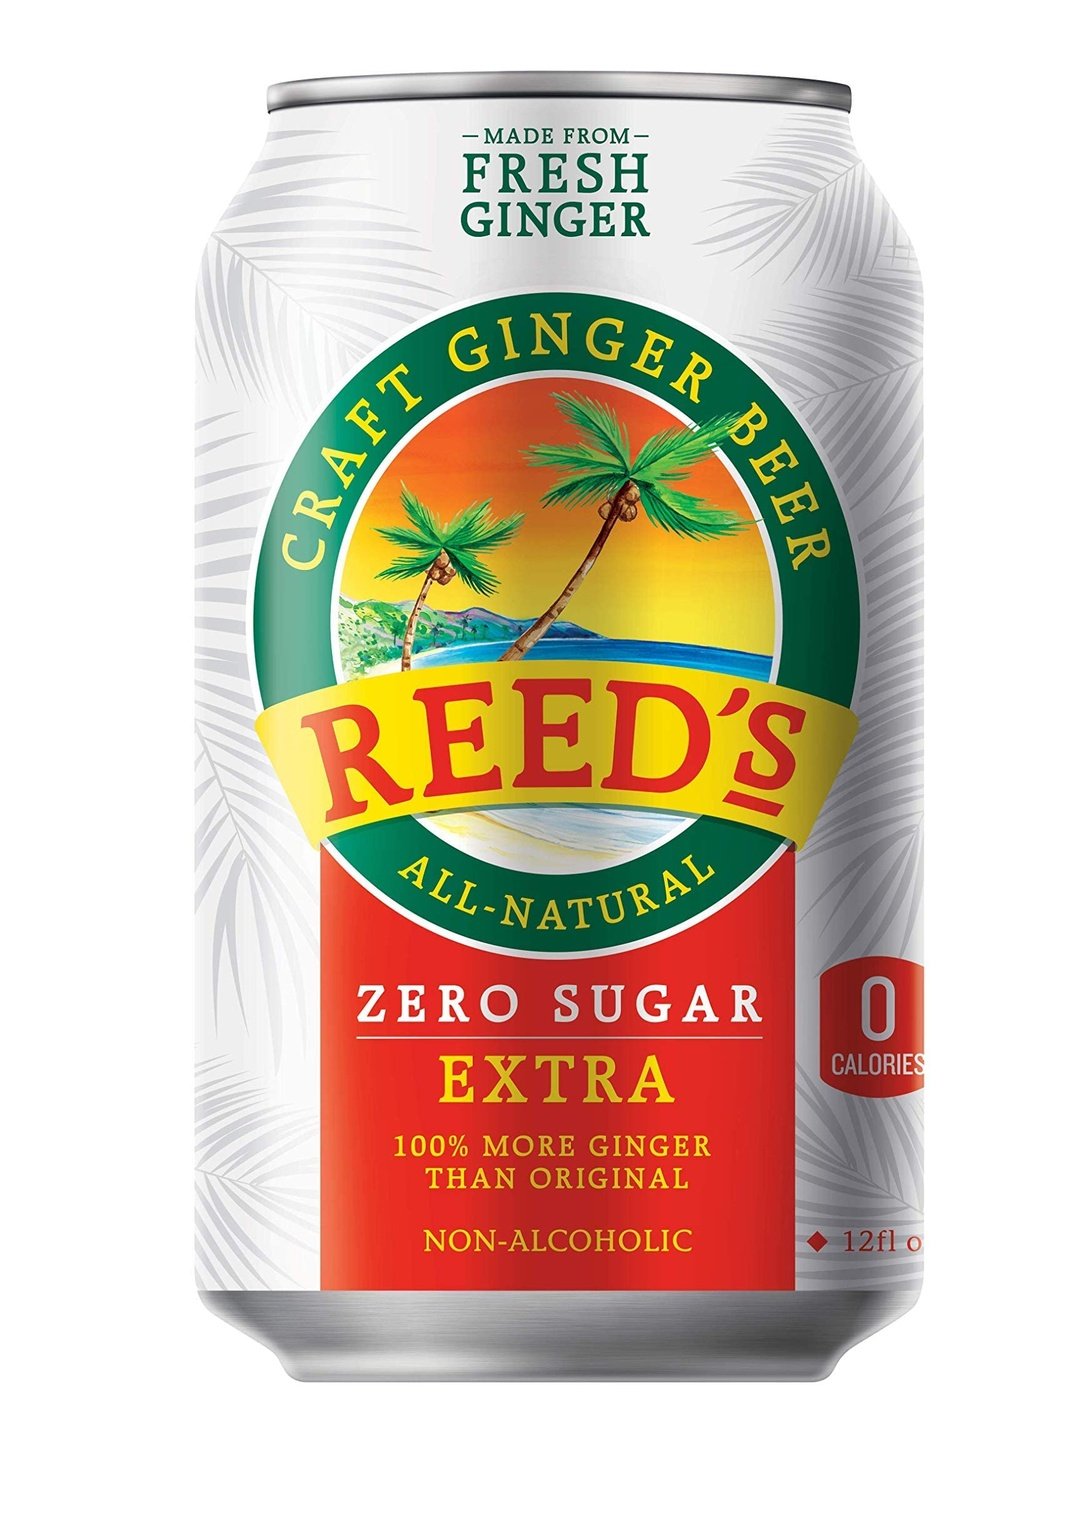 REED'S Ginger Beer Zero Sugar Extra